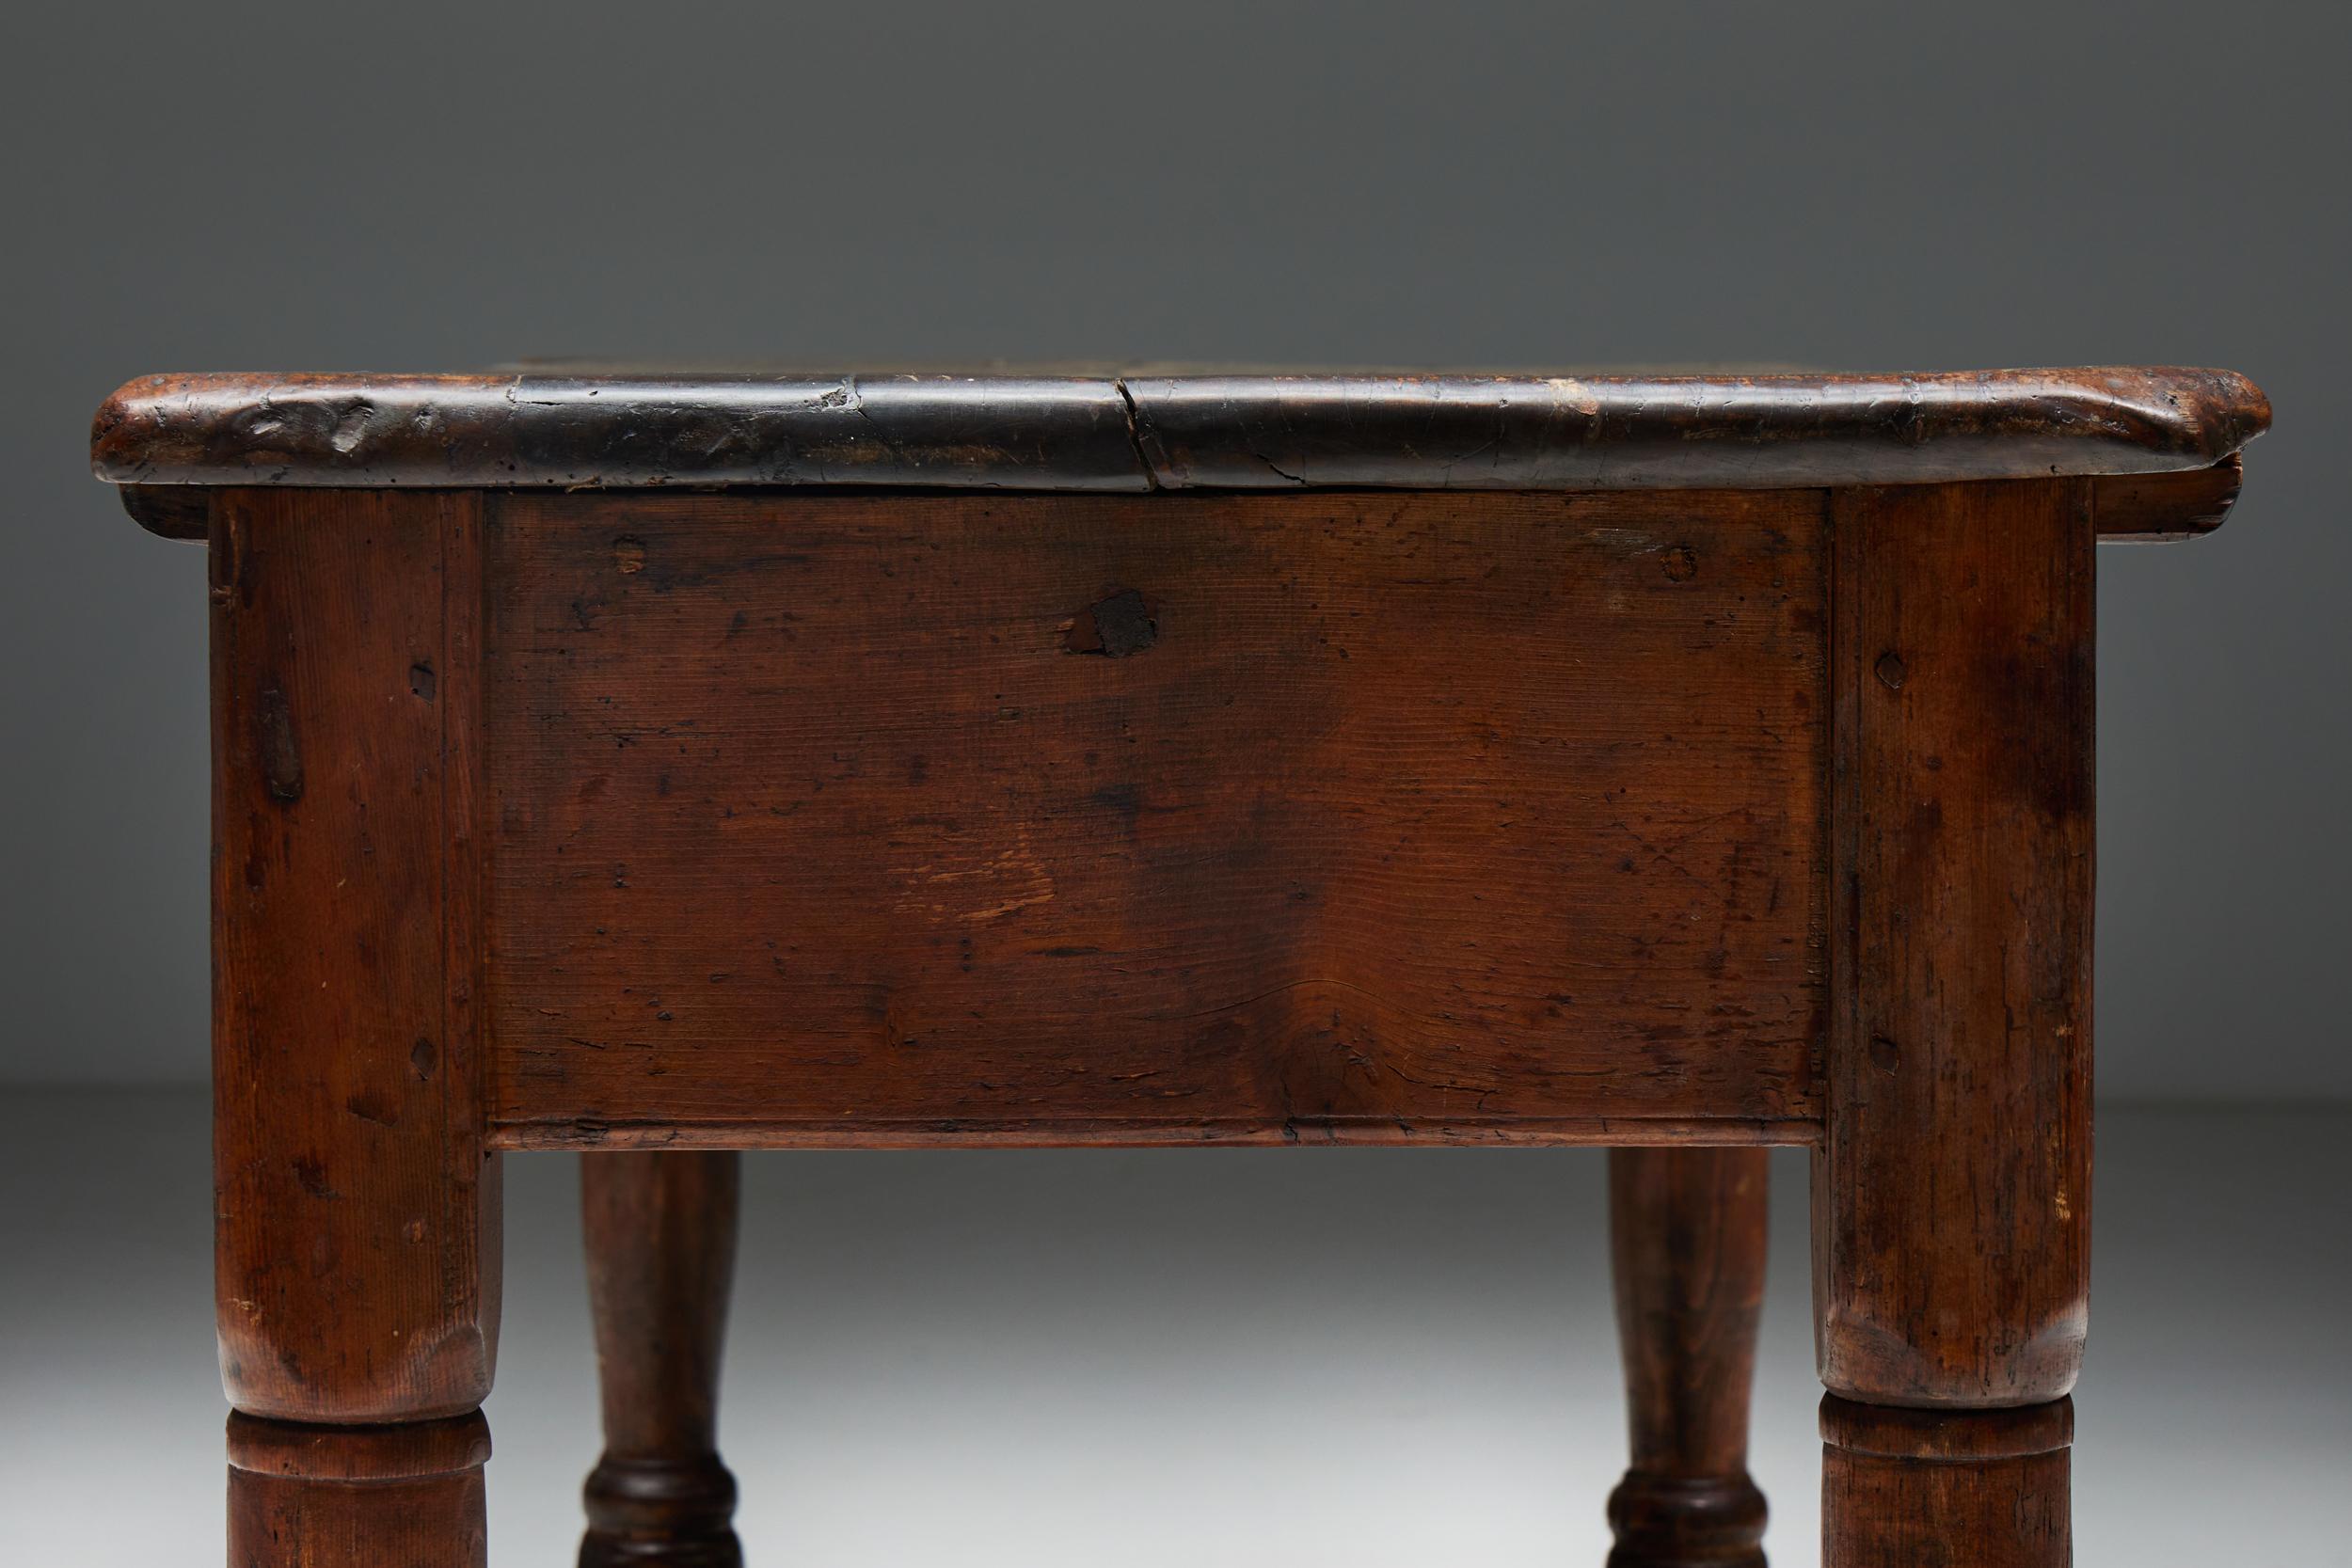 Rustic Art Populaire Writing Table, France, Early 20th Century For Sale 8